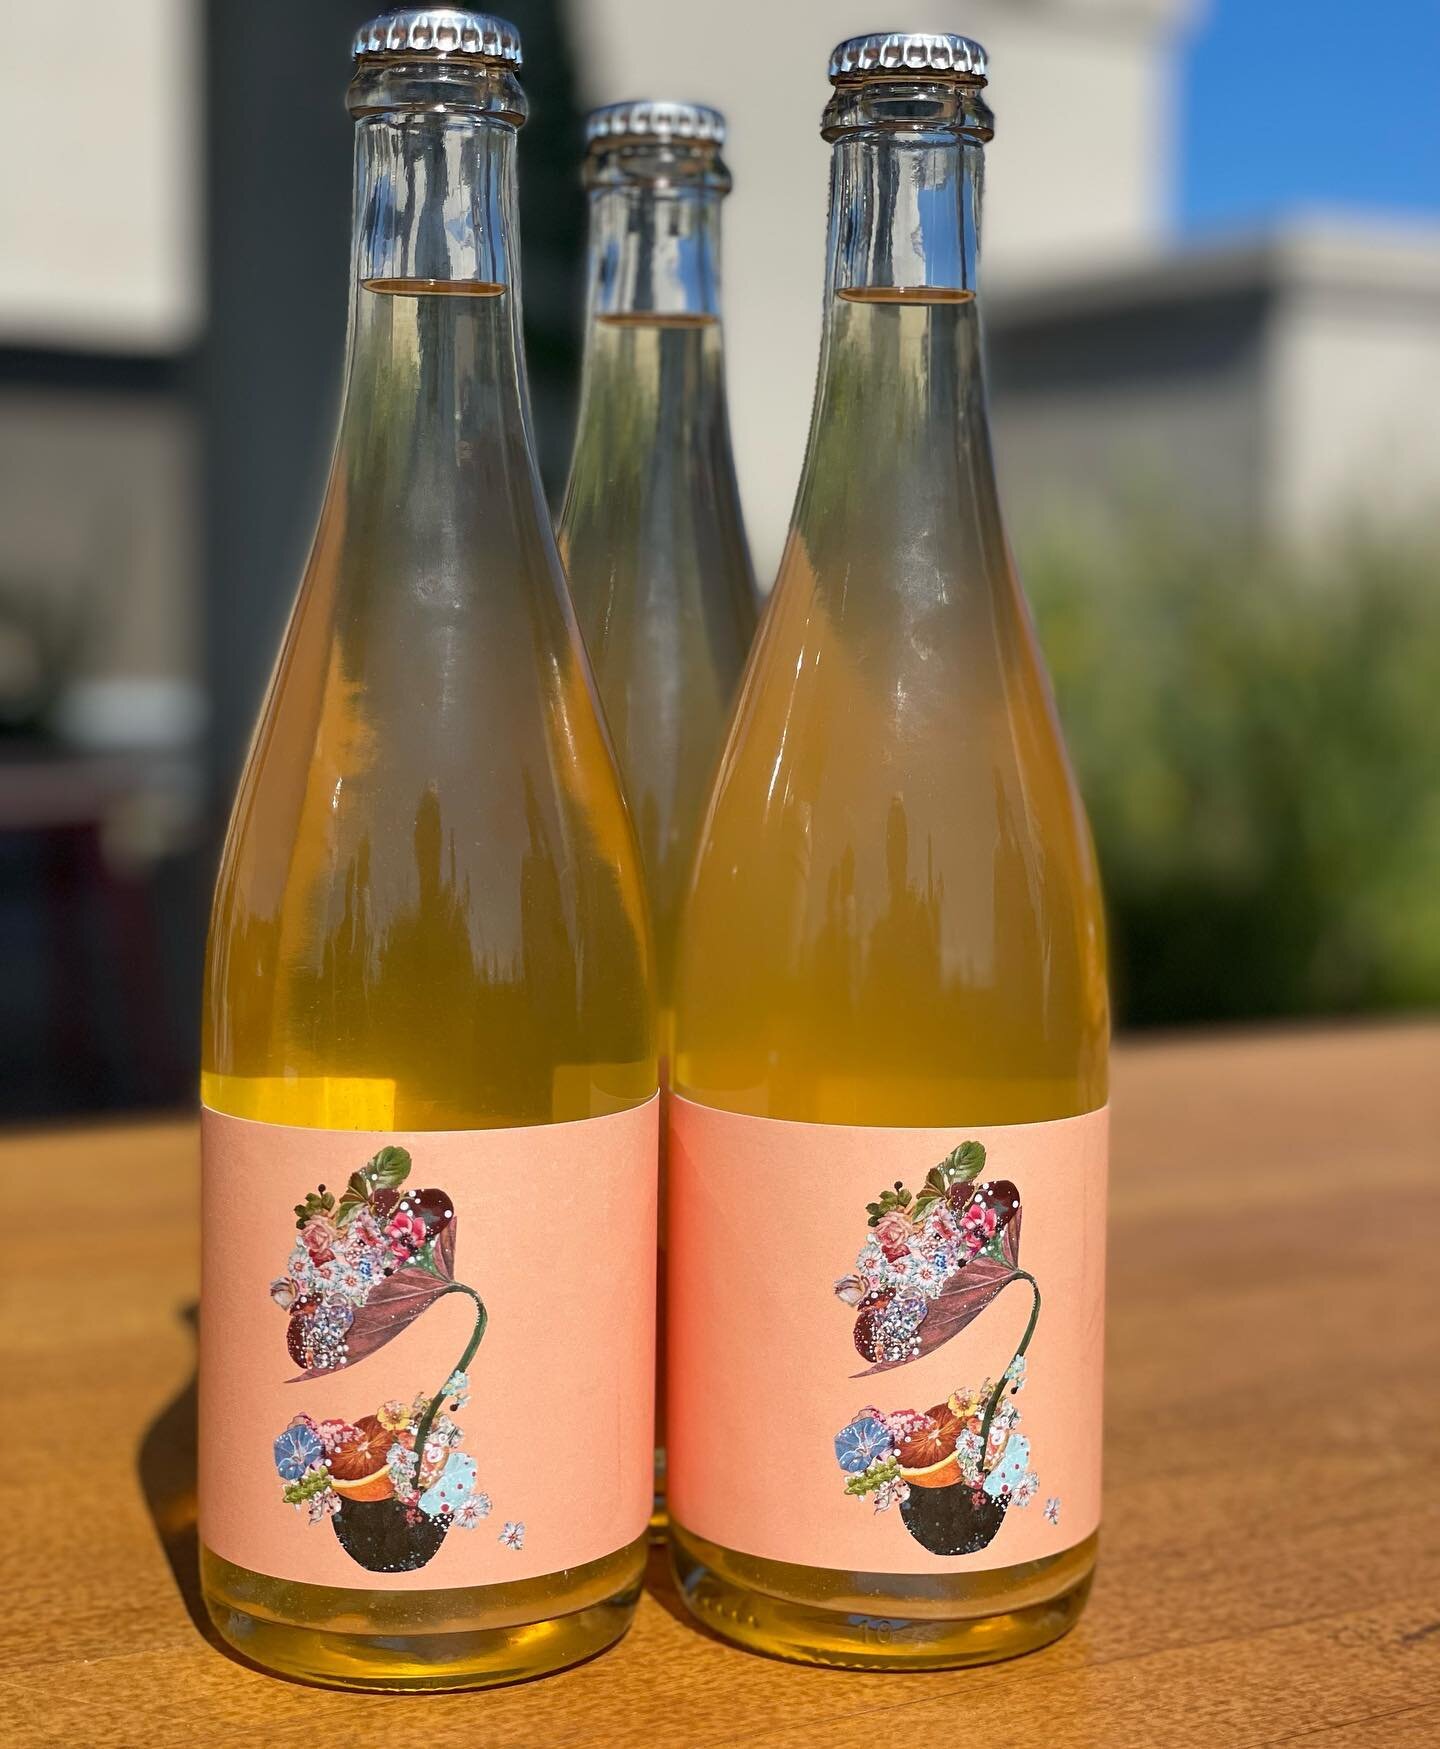 Our Co Ferment P&eacute;tillant Naturel is here and delicious! You can find us at the estate, Chatham Fest or Hudson Farmers Market this weekend!
&bull;
&bull;
&bull;
#drinklocal #supportlocal #chathamny #hudsonny #columbiacountyny #newyorkwines #nys